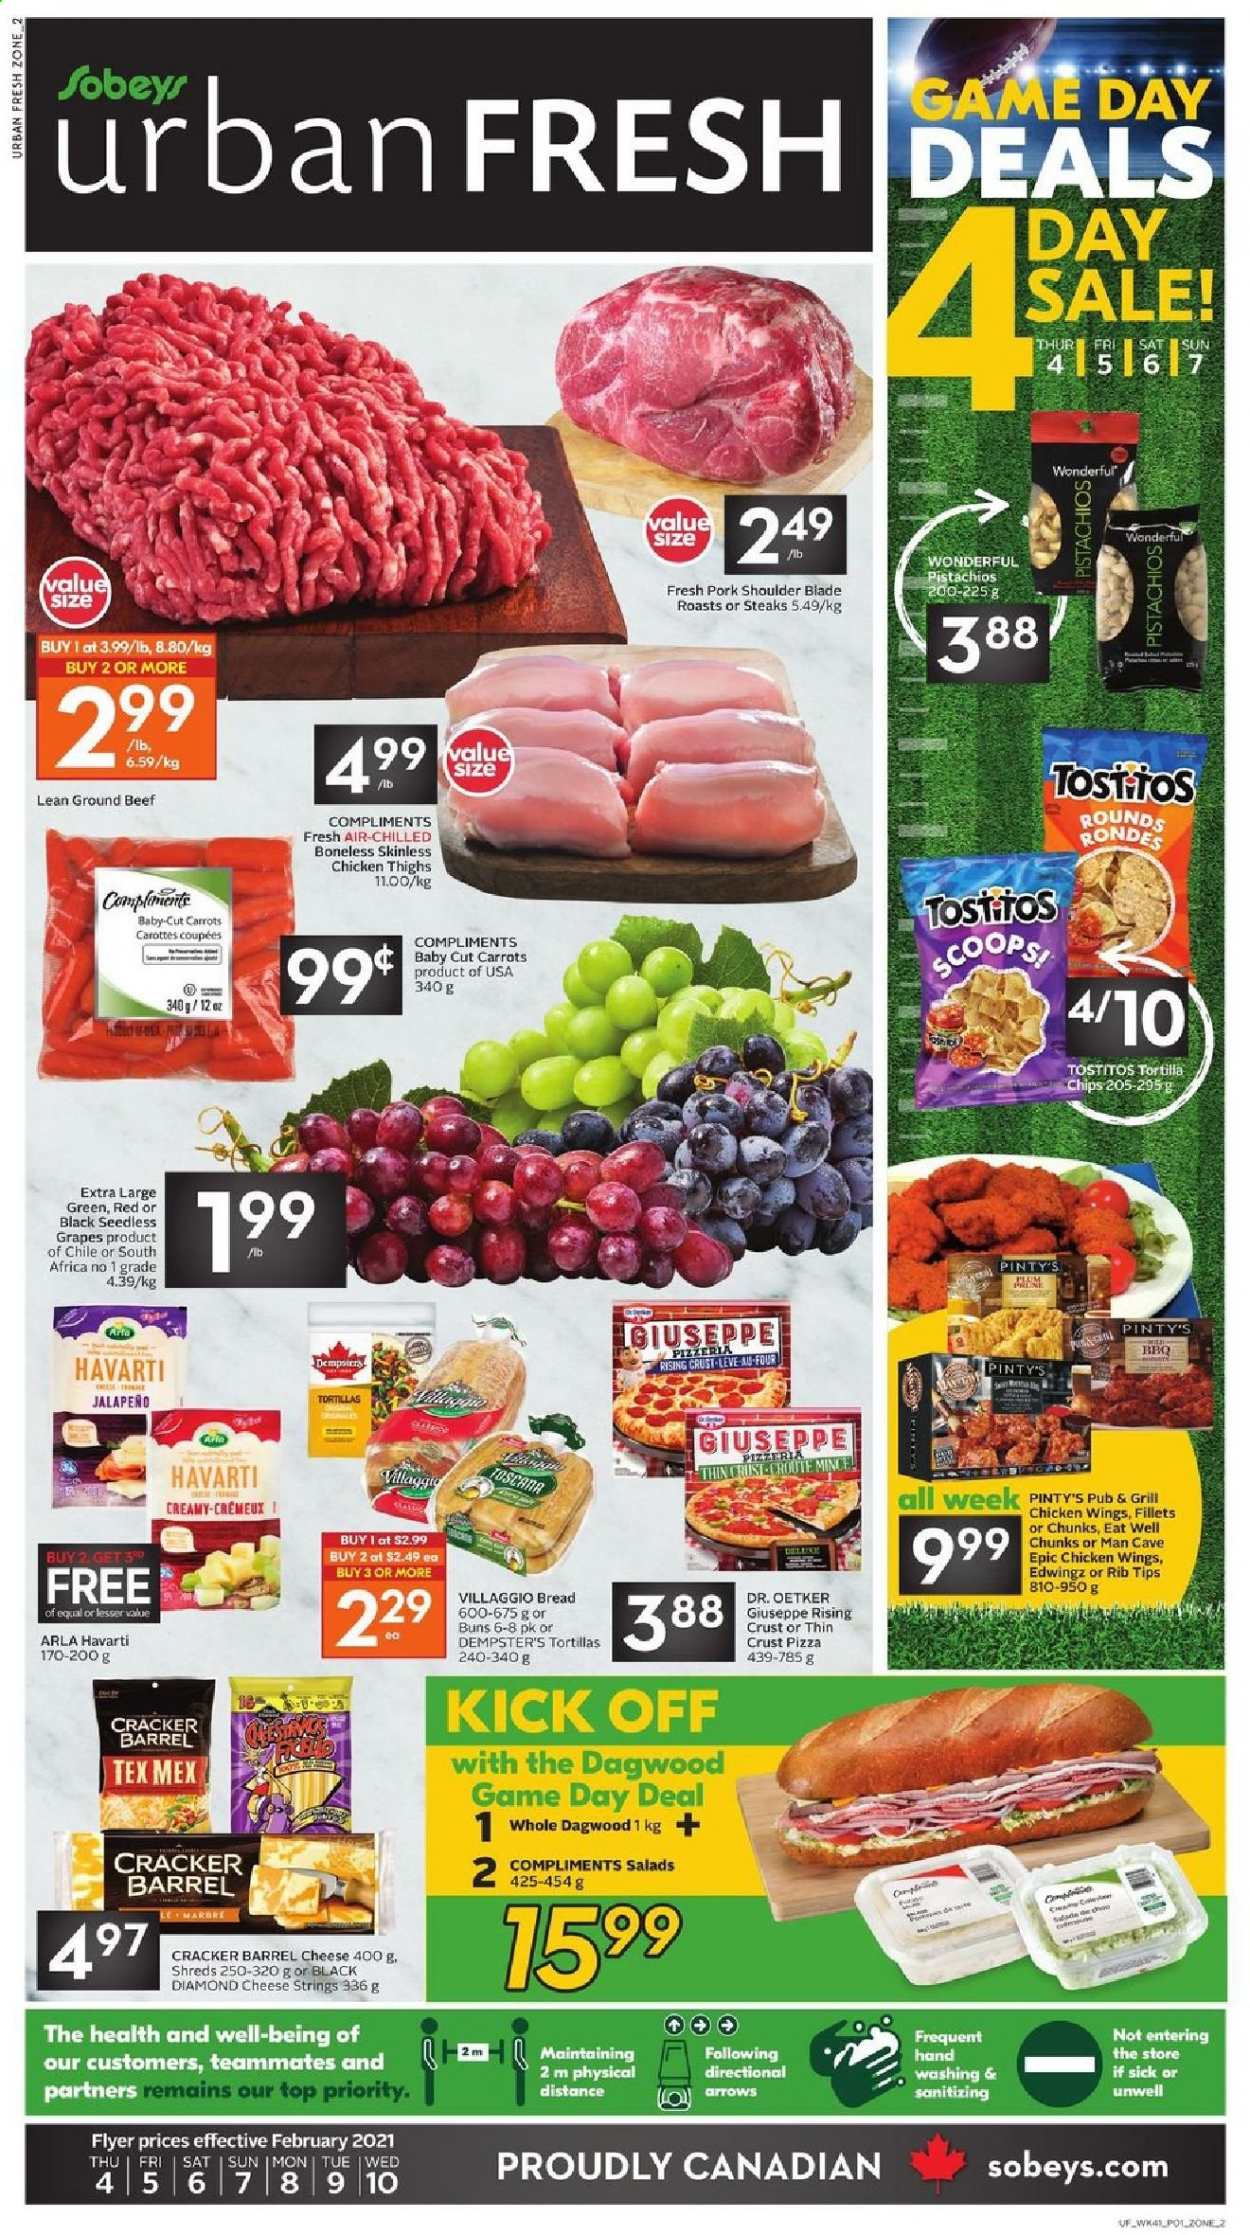 thumbnail - Sobeys Urban Fresh Flyer - February 04, 2021 - February 10, 2021 - Sales products - bread, buns, carrots, jalapeño, grapes, seedless grapes, pizza, dagwood, Havarti, Dr. Oetker, Arla, chicken wings, crackers, tortilla chips, Tostitos, pistachios, chicken thighs, chicken, beef meat, ground beef, pork meat, pork shoulder, pet bed, chips, steak. Page 1.